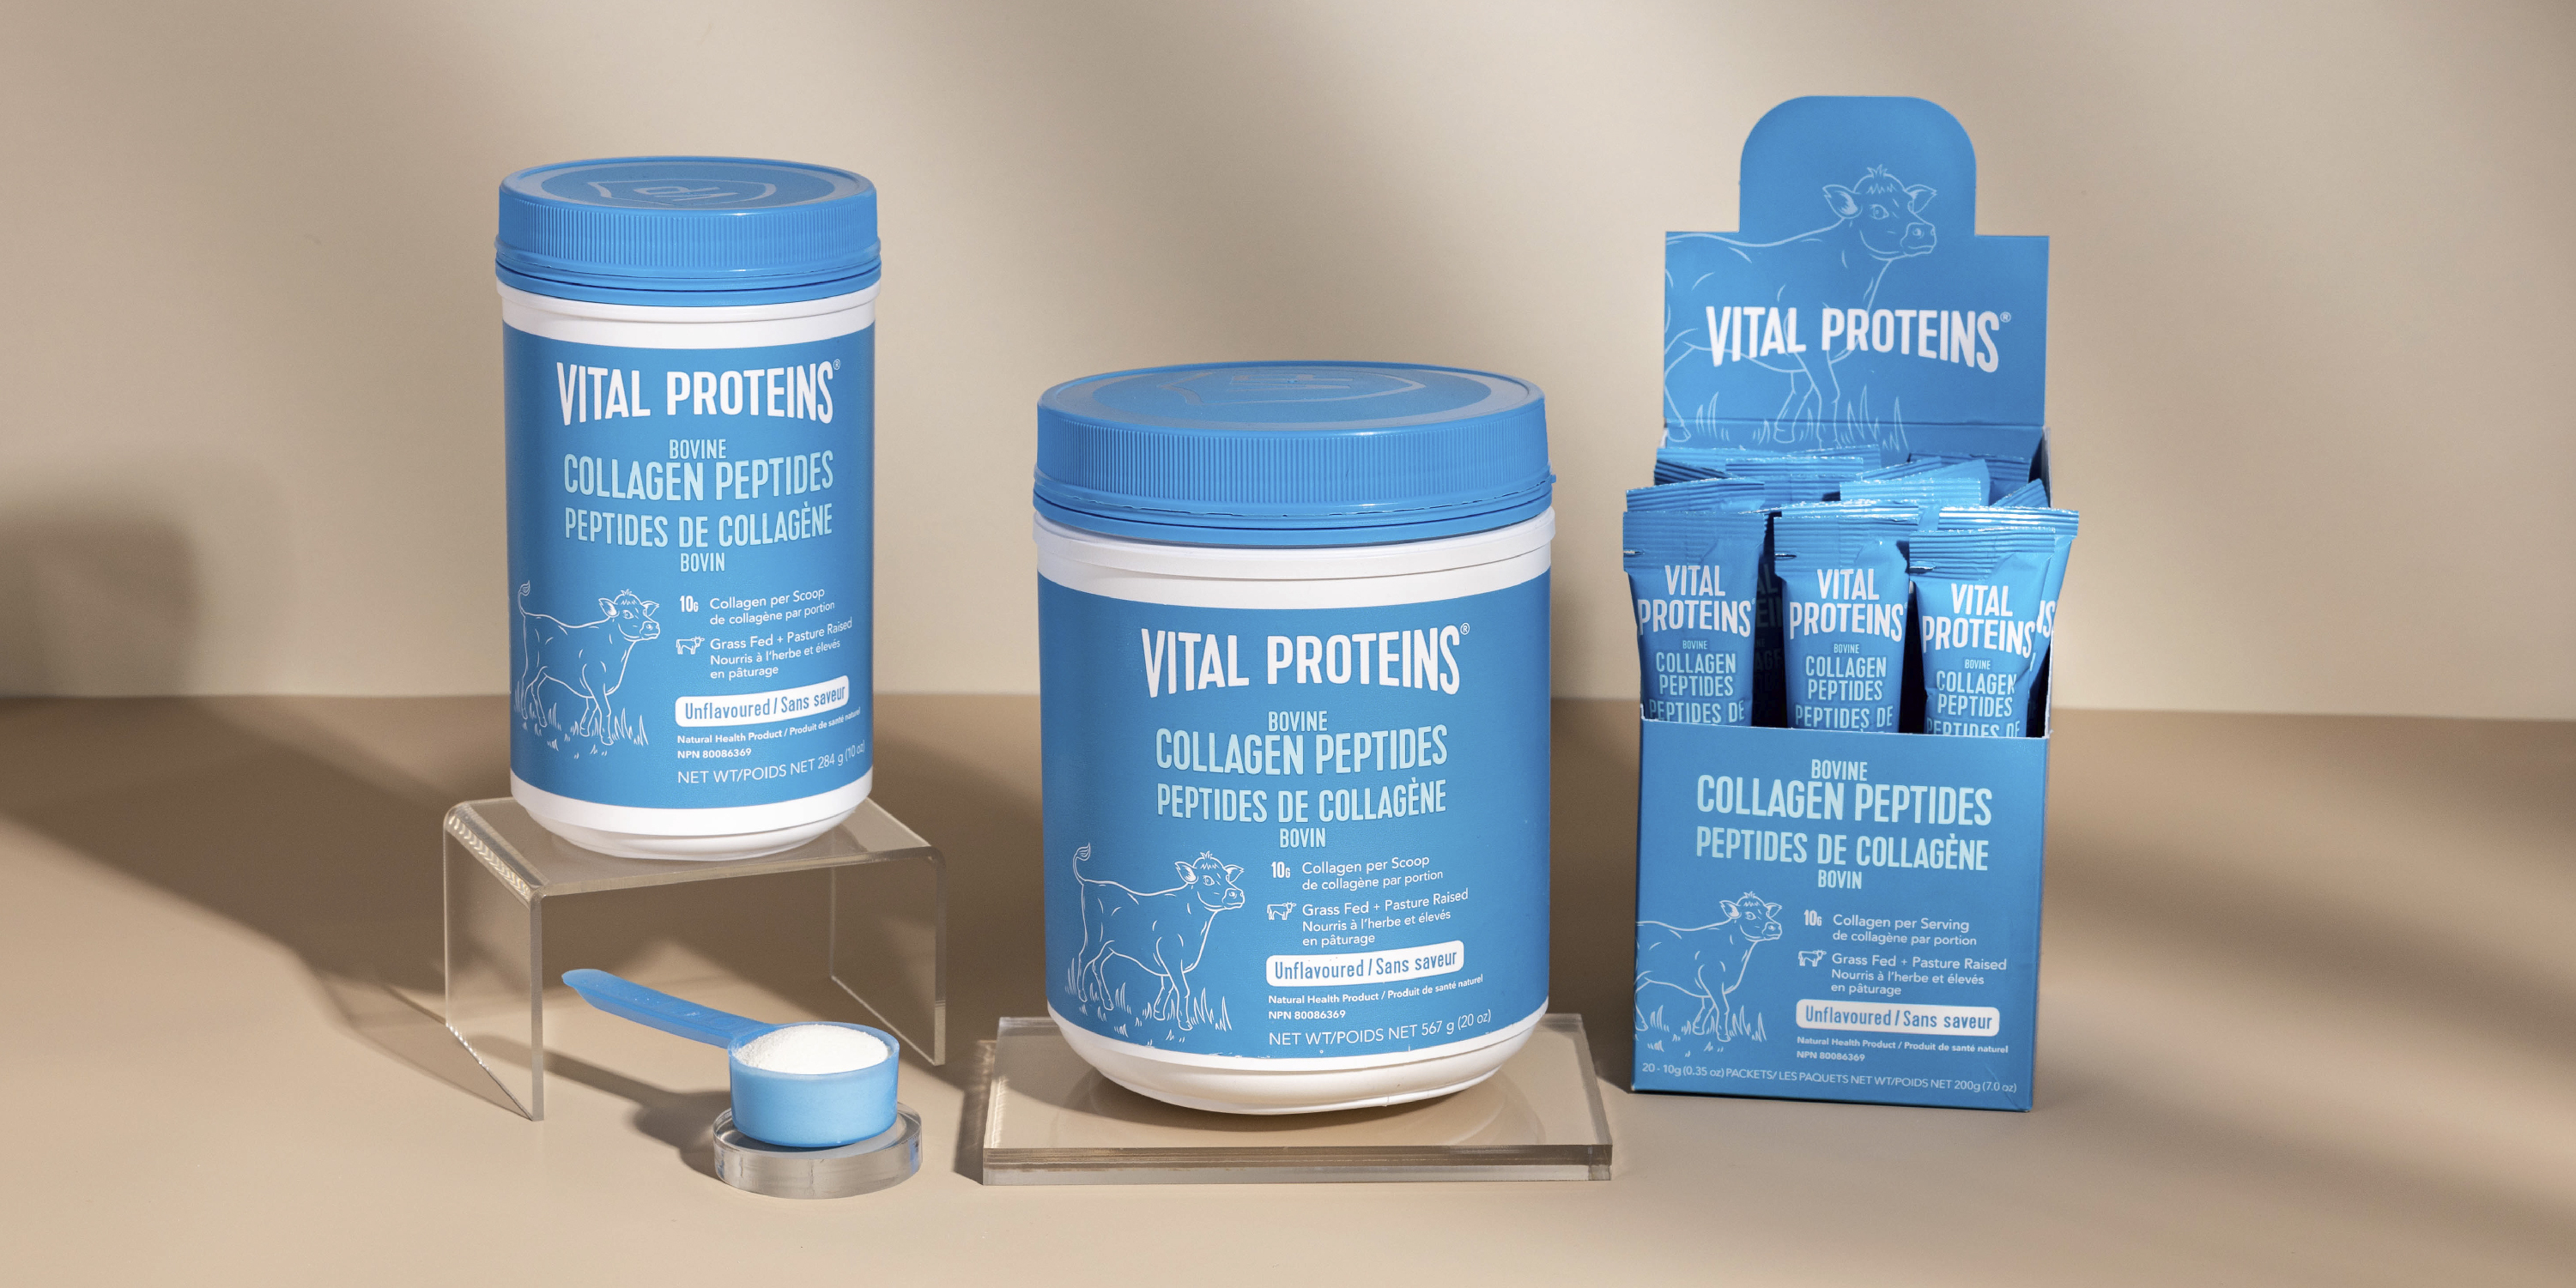 Vital Proteins products